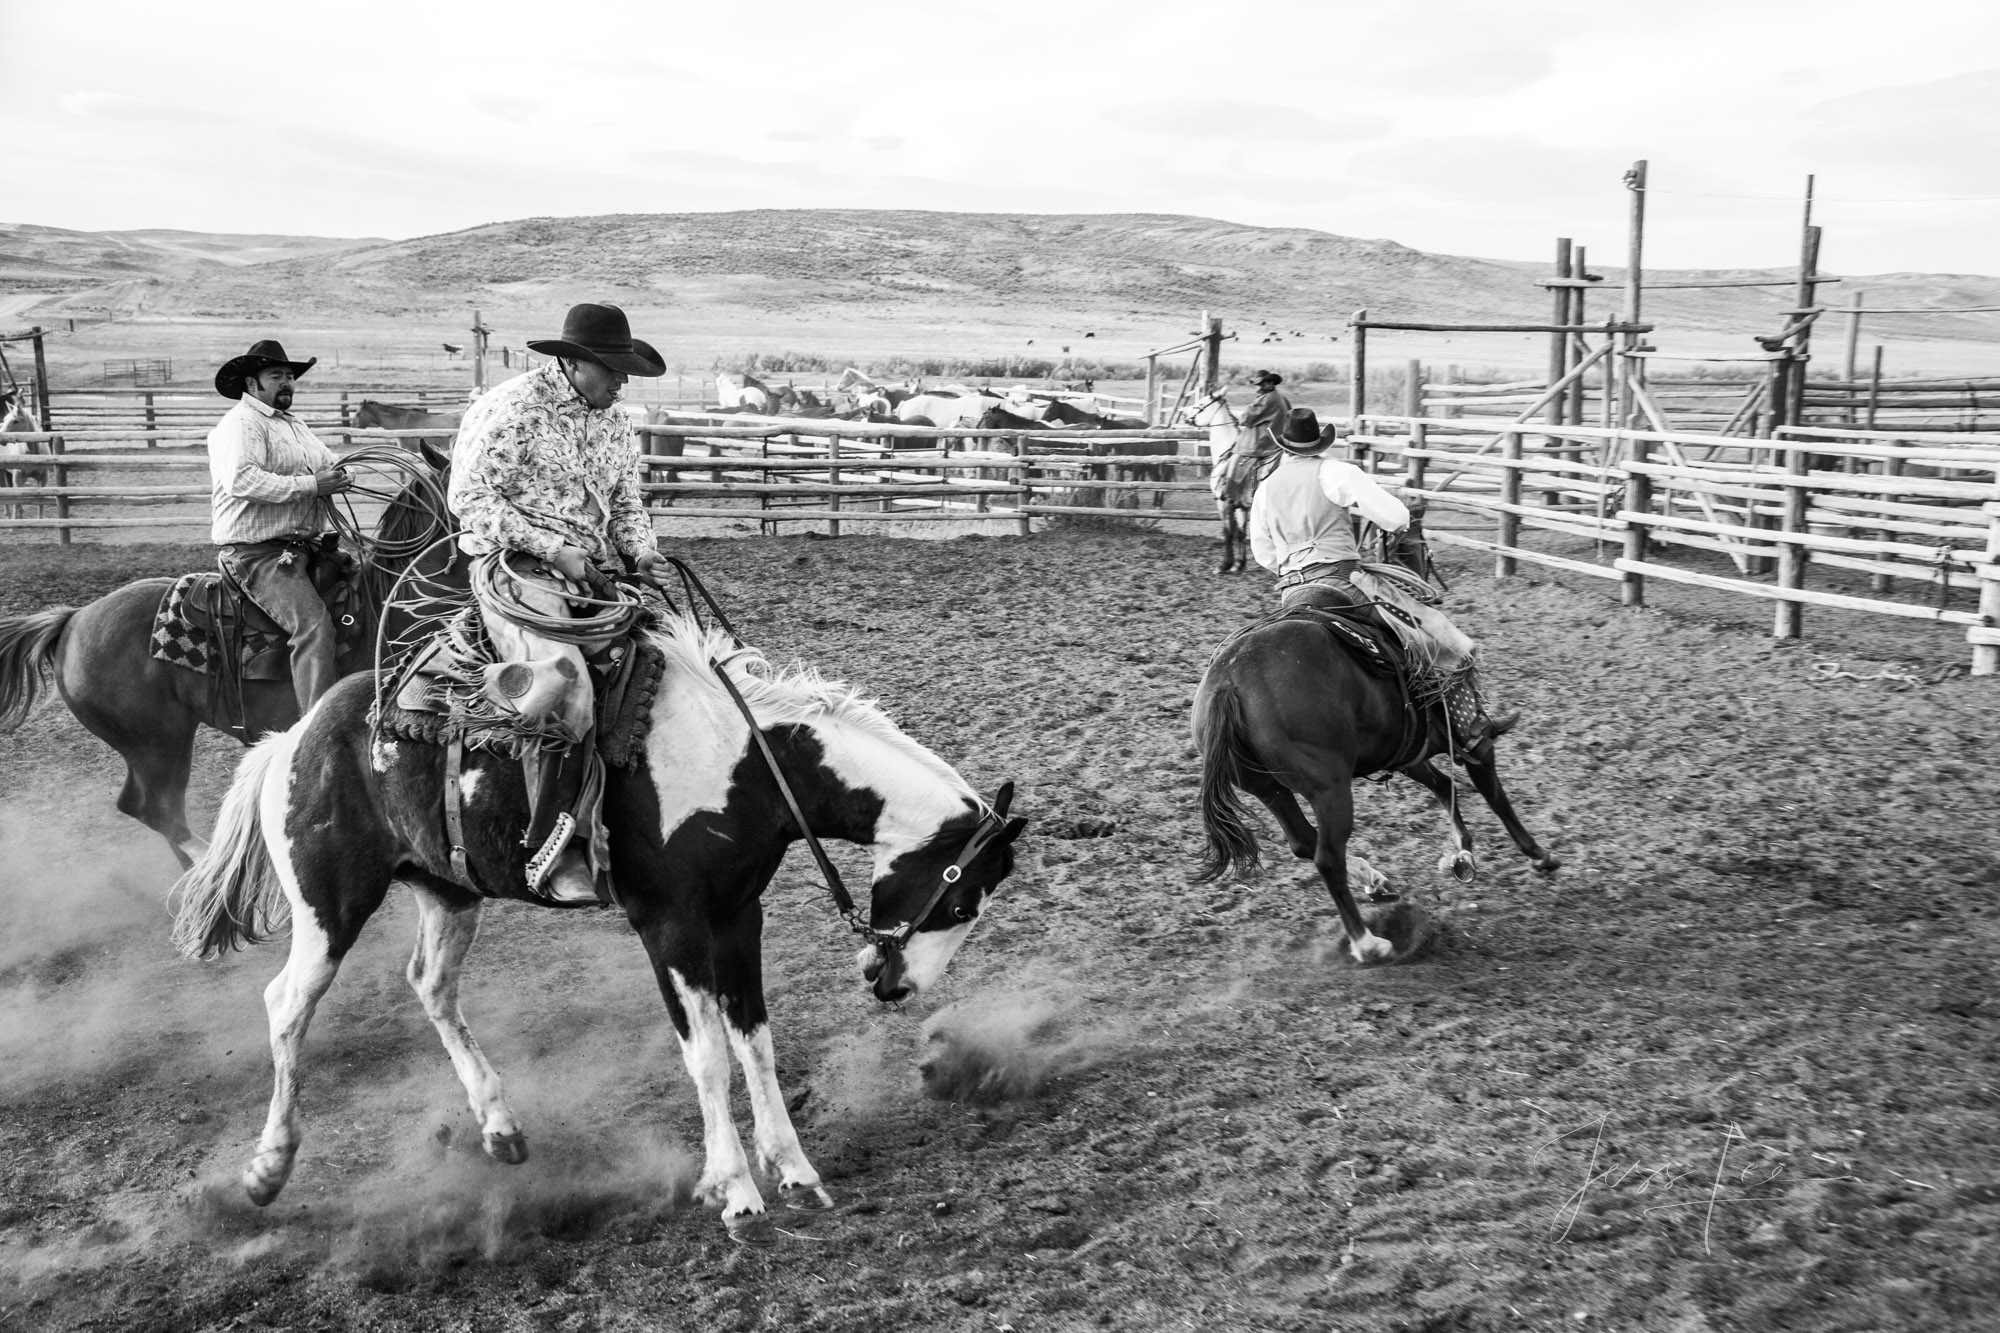 Fine Art Limited Edition Photo Prints of Cowboys, Horses, and life in the West. Ouch! A Cowboy picture in black and white. This...